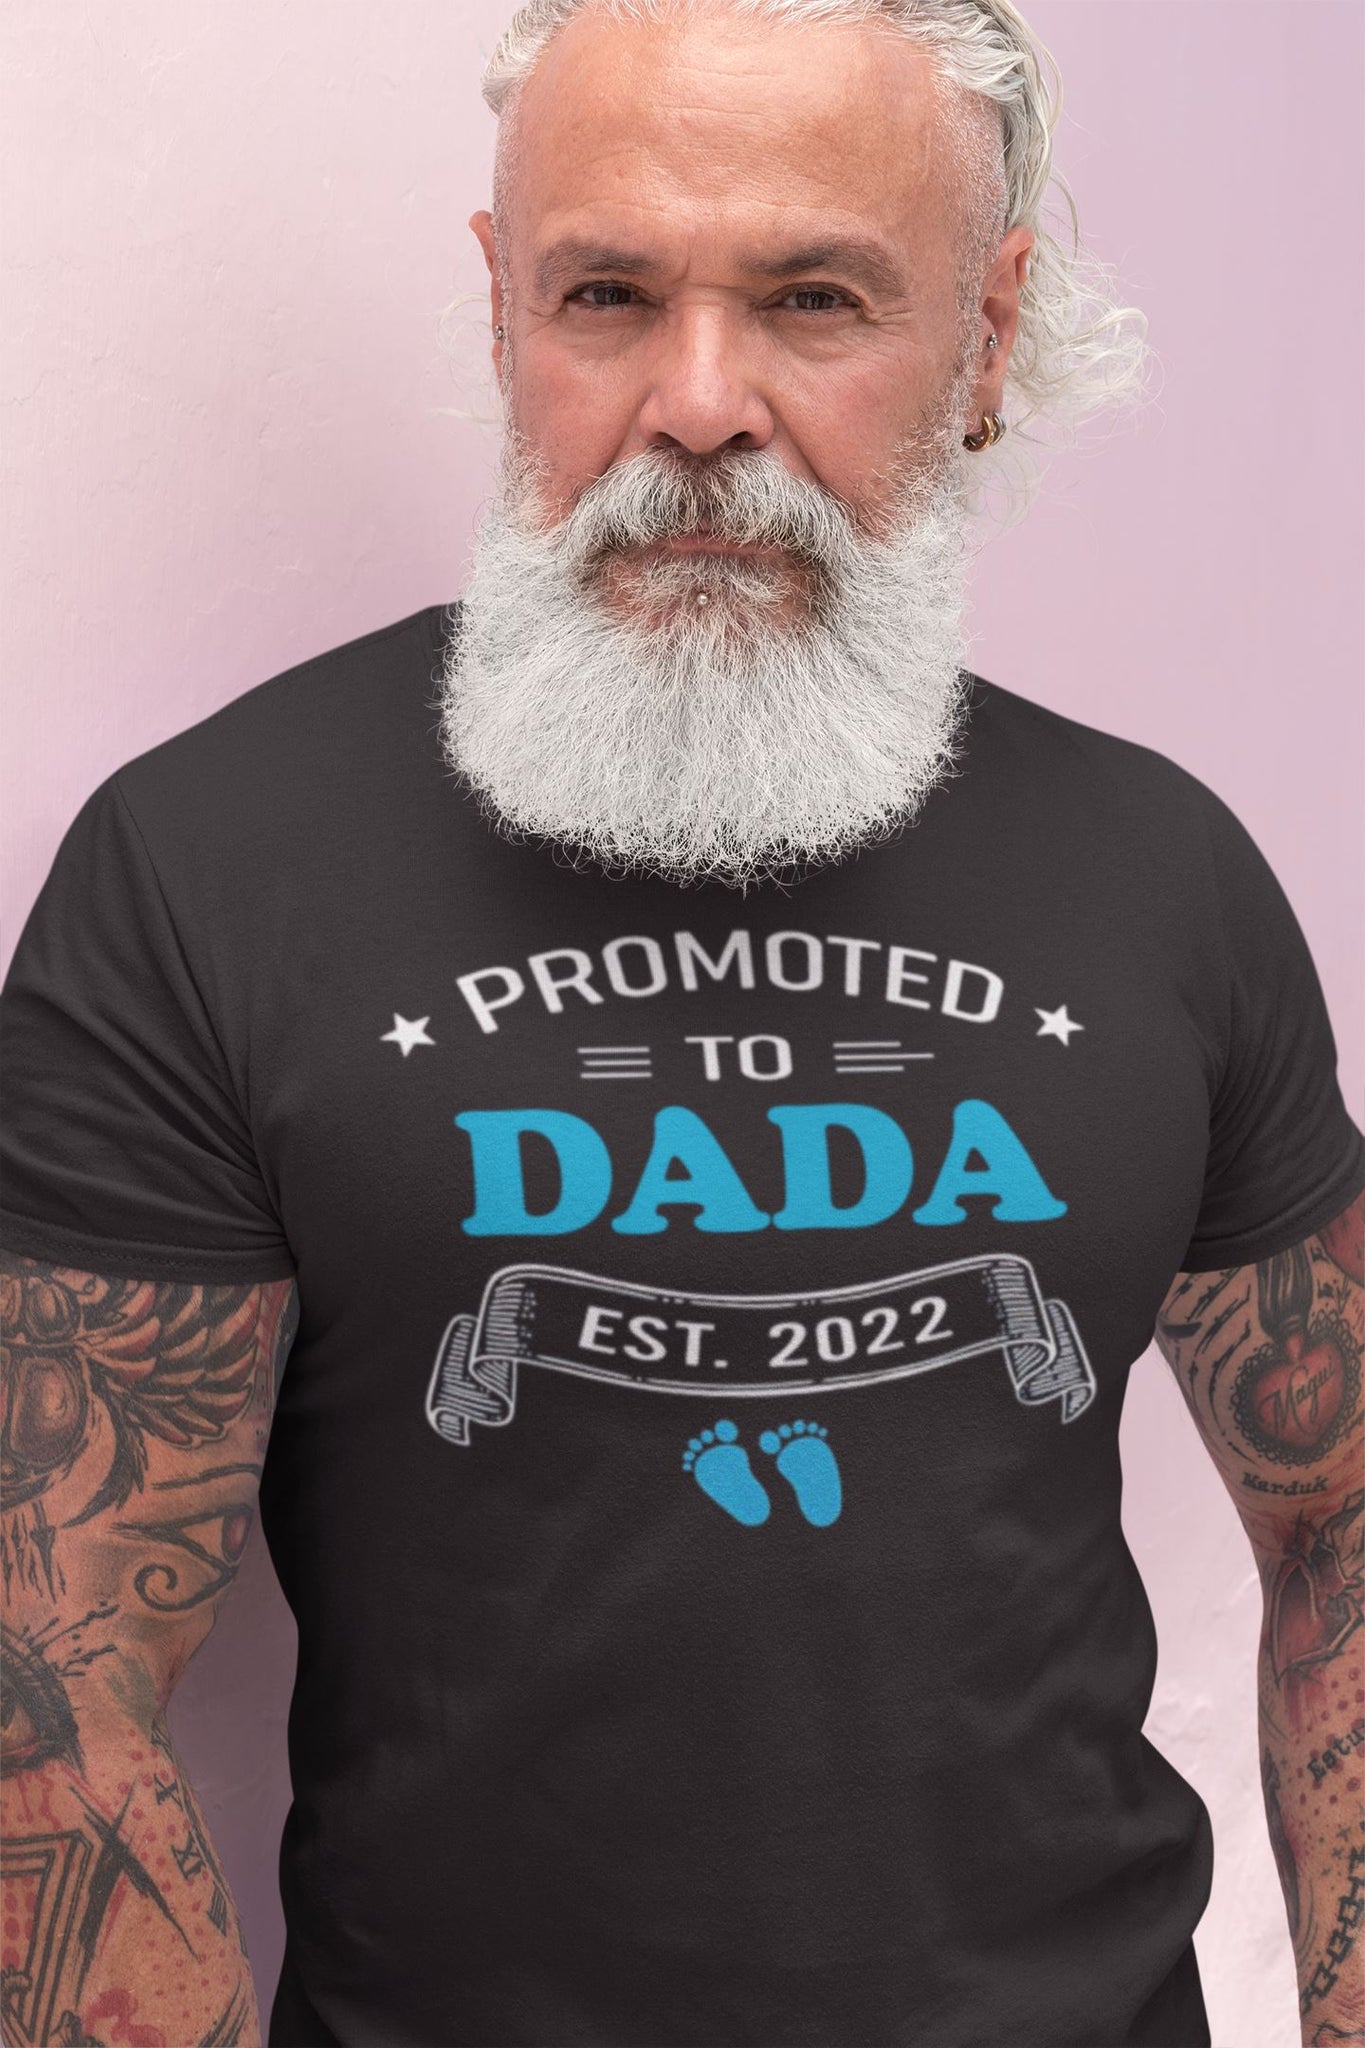 Promoted to Dada Est. 2022 Exclusive T Shirt for Men freeshipping - Catch My Drift India